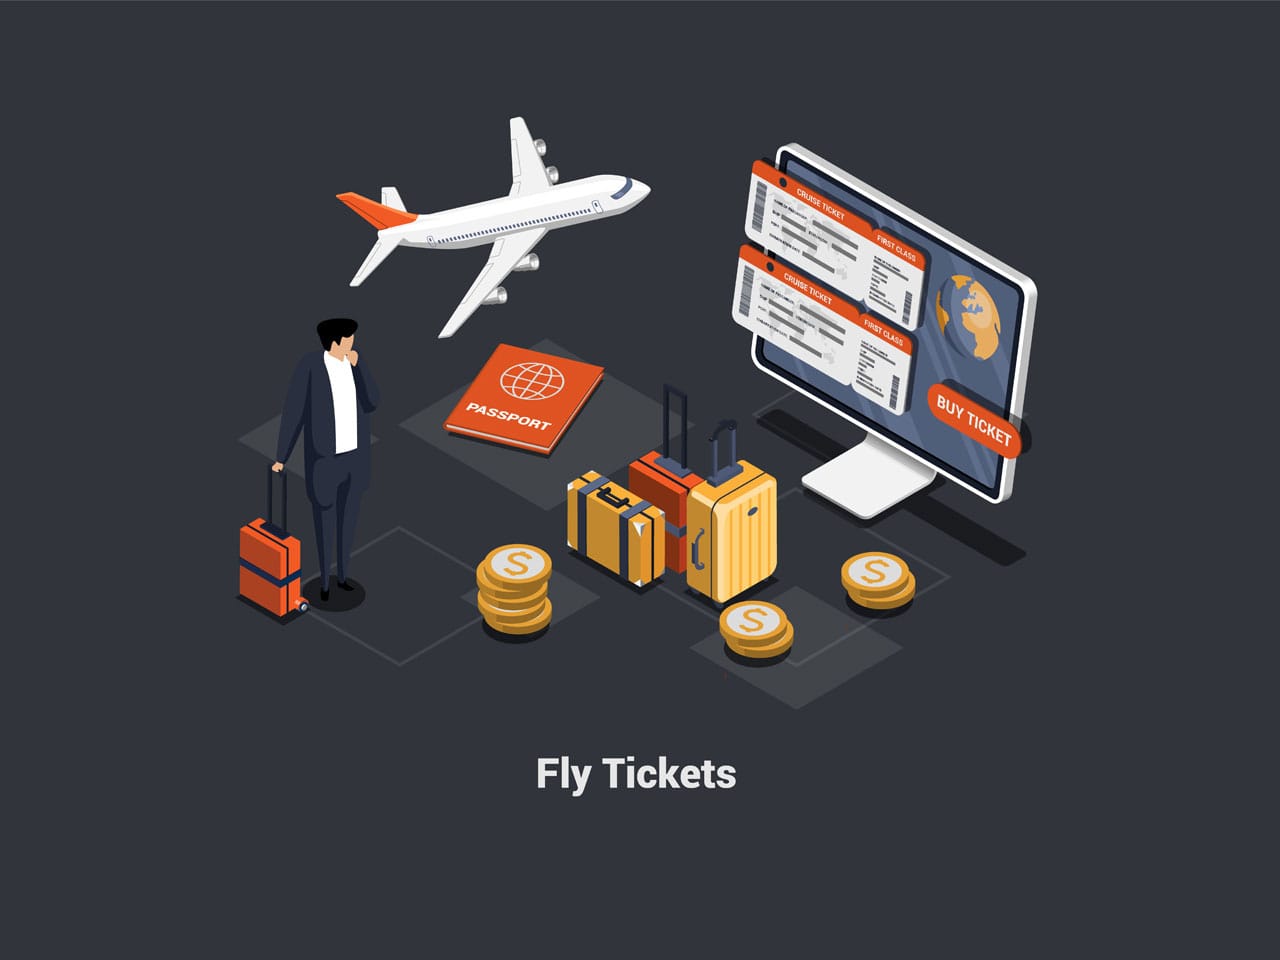 Online buying fly tickets with app traveling by plane concept business man waiting departure airport character getting boarding pass checkin luggage isometric 3d illustration